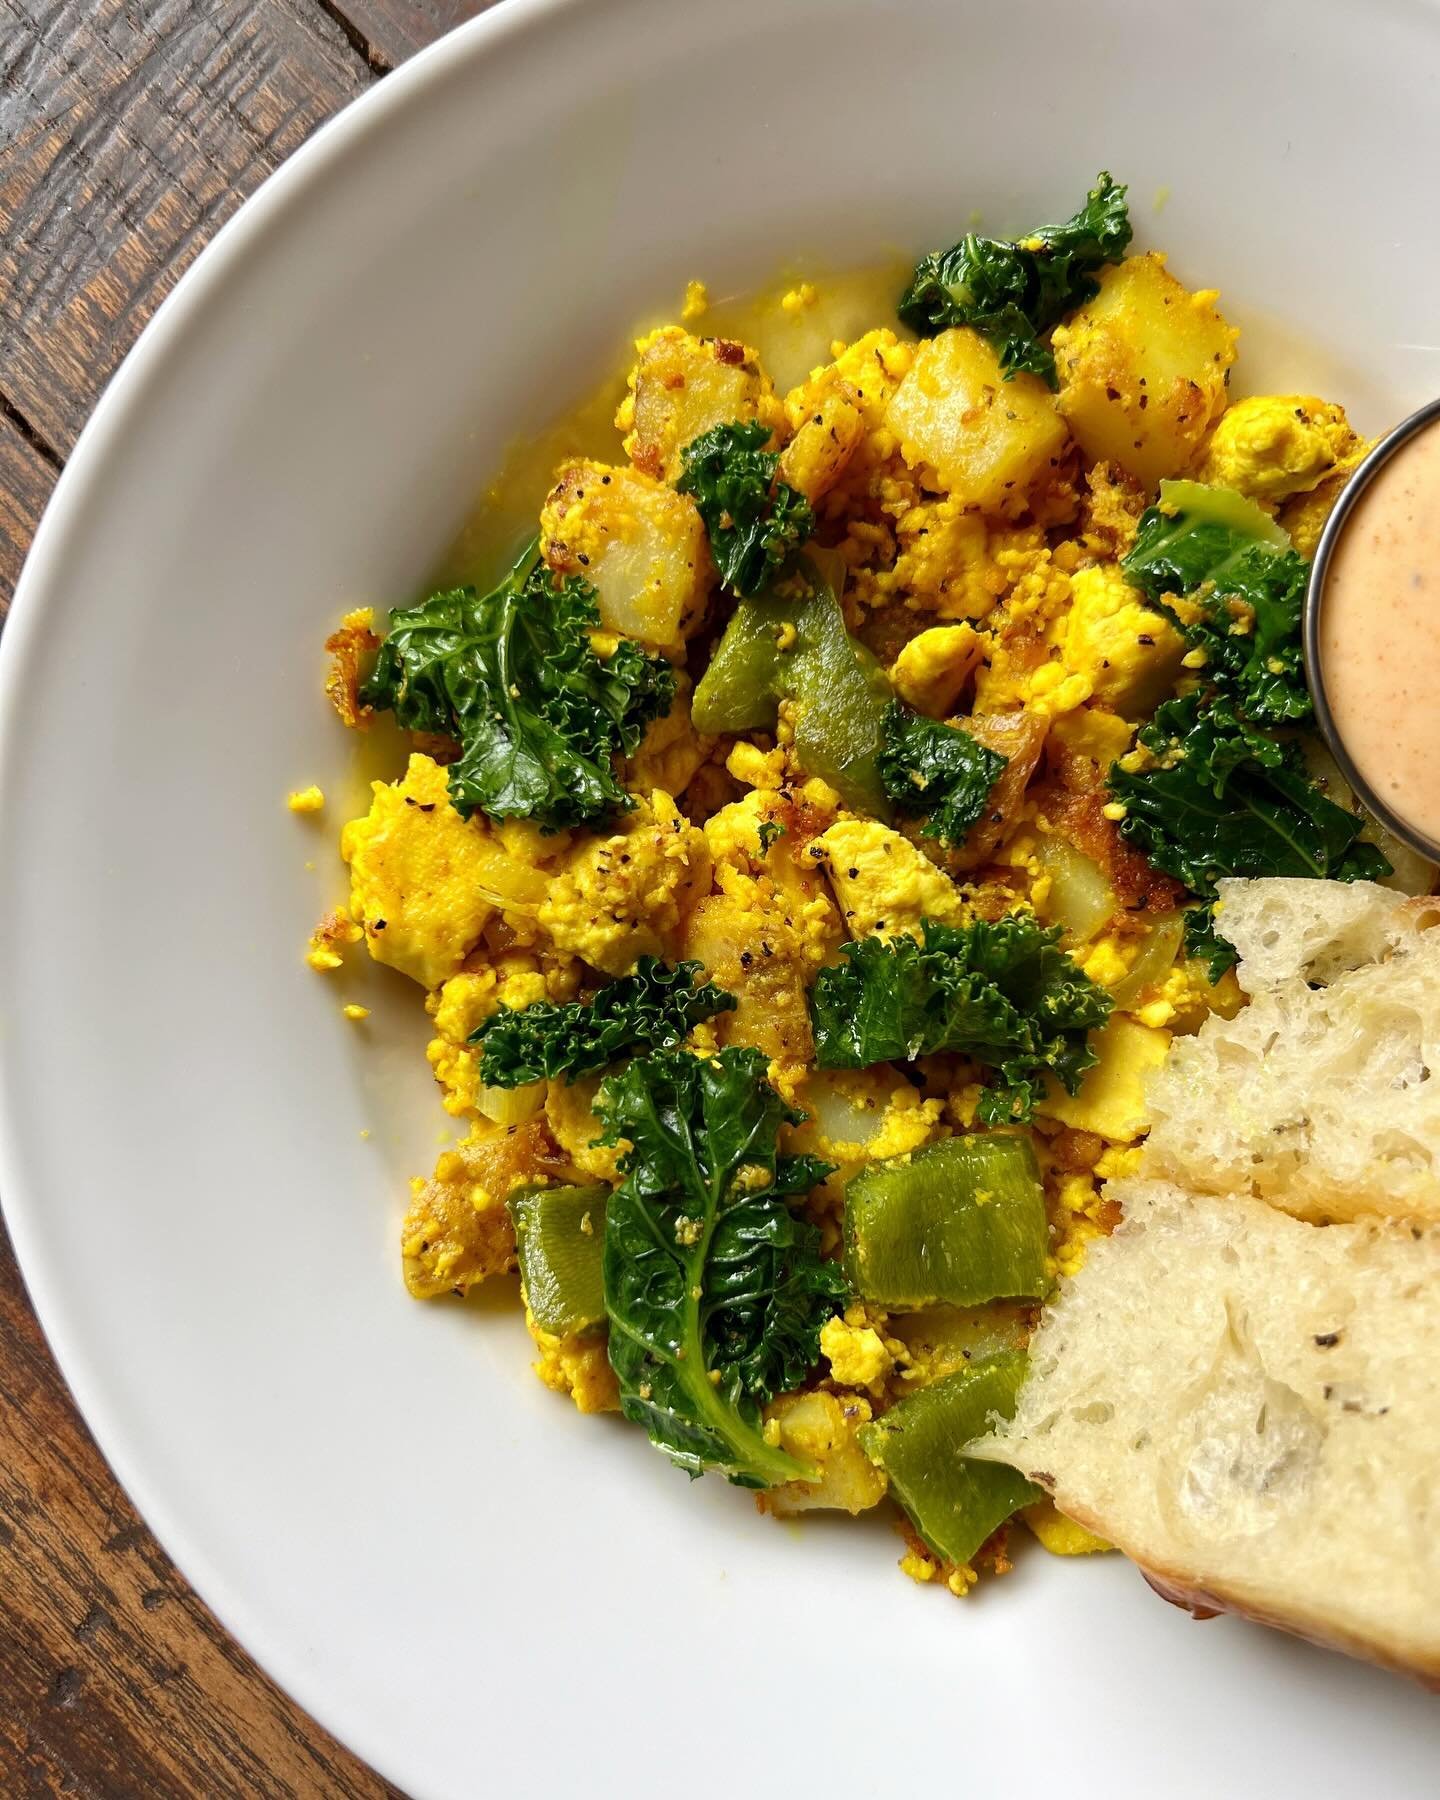 Have you tried our Tofu Scramble yet? 😋

#yegeats #yegbrunch #tofuscramble #brunchtime